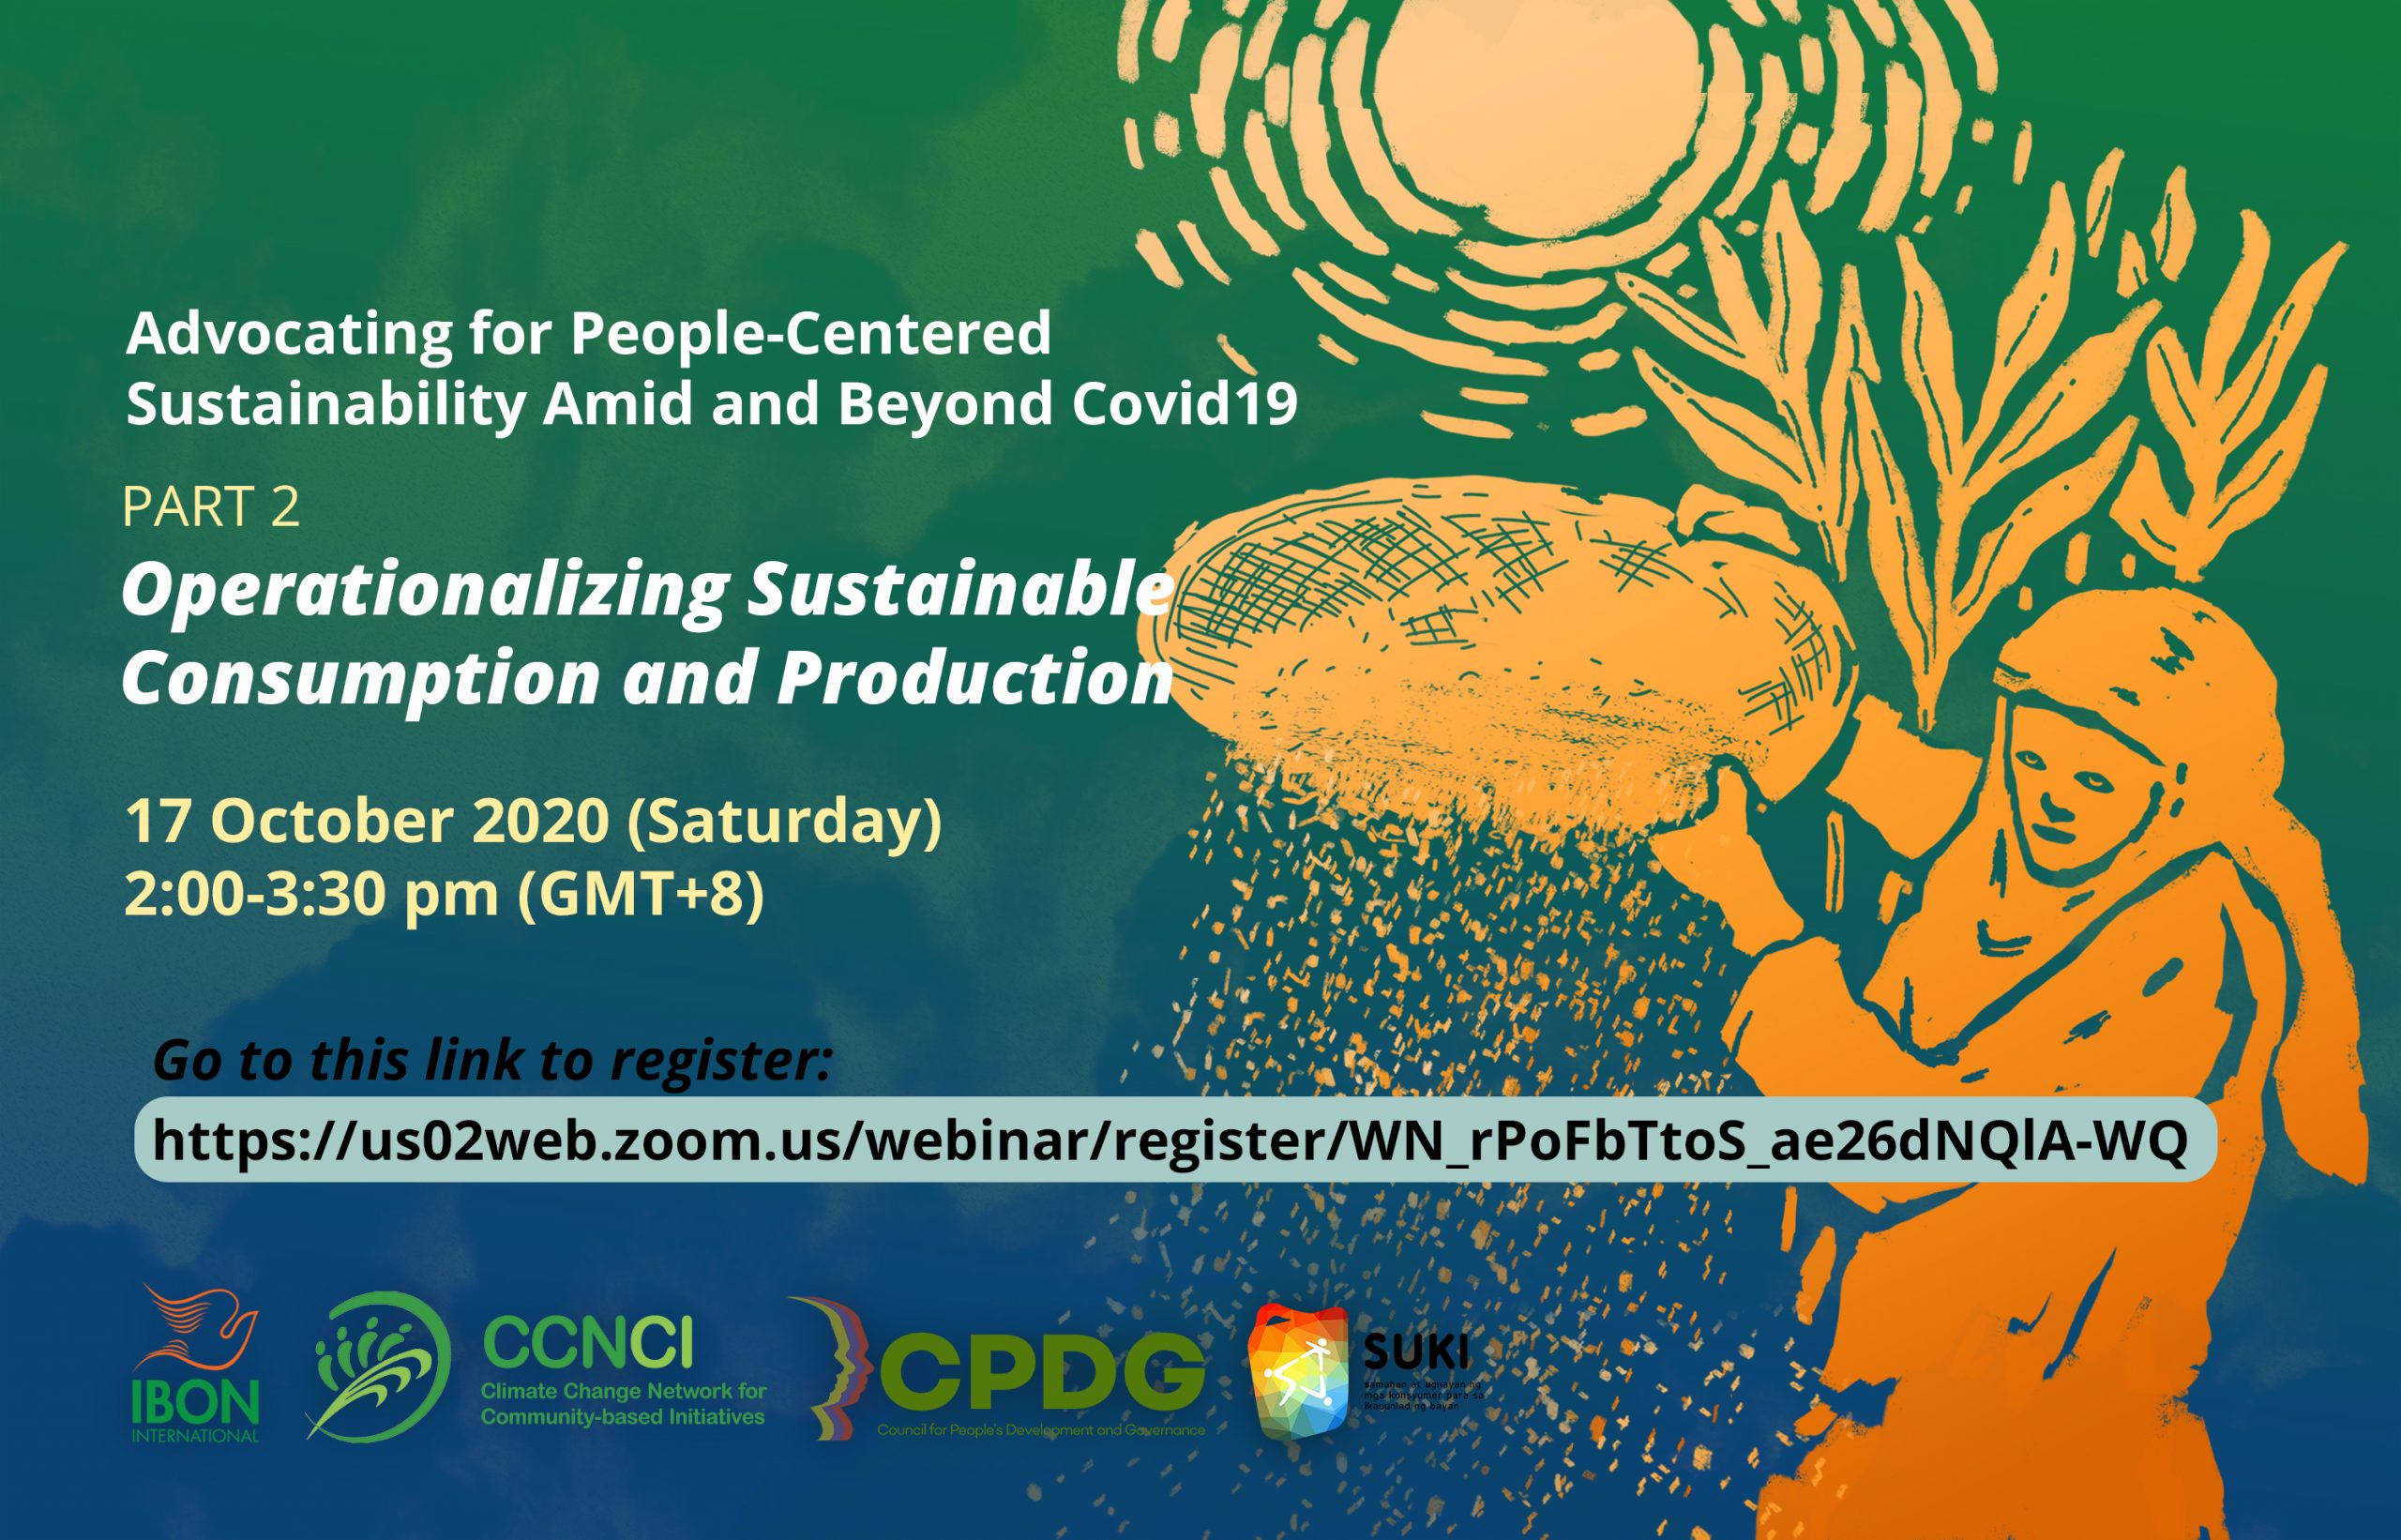 WEBINAR SERIES / Advocating for People-Centered Sustainability Amid and Beyond COVID-19 (17, 9 October)